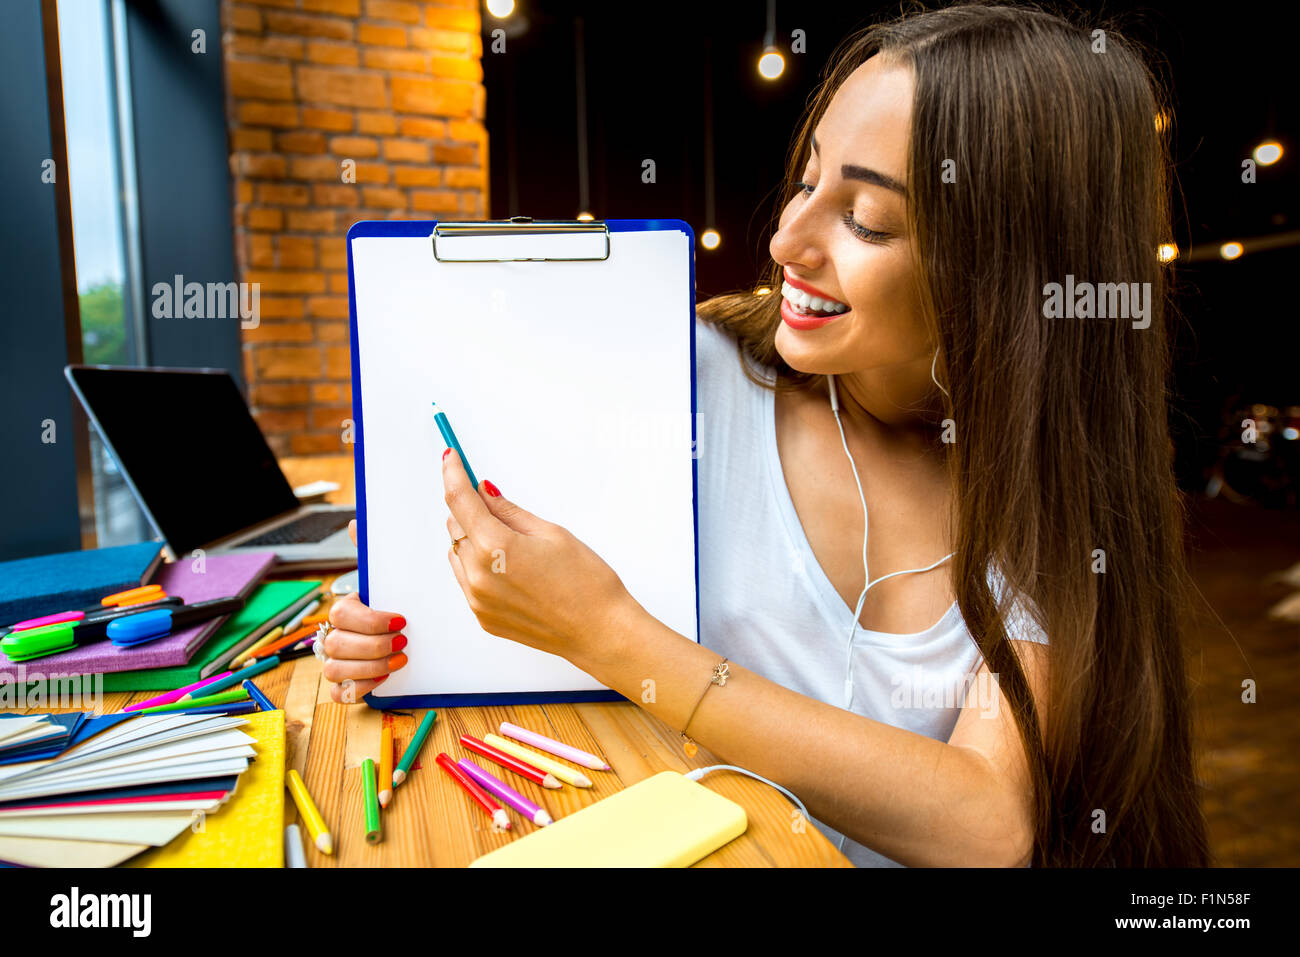 Woman showing board with white paper Stock Photo